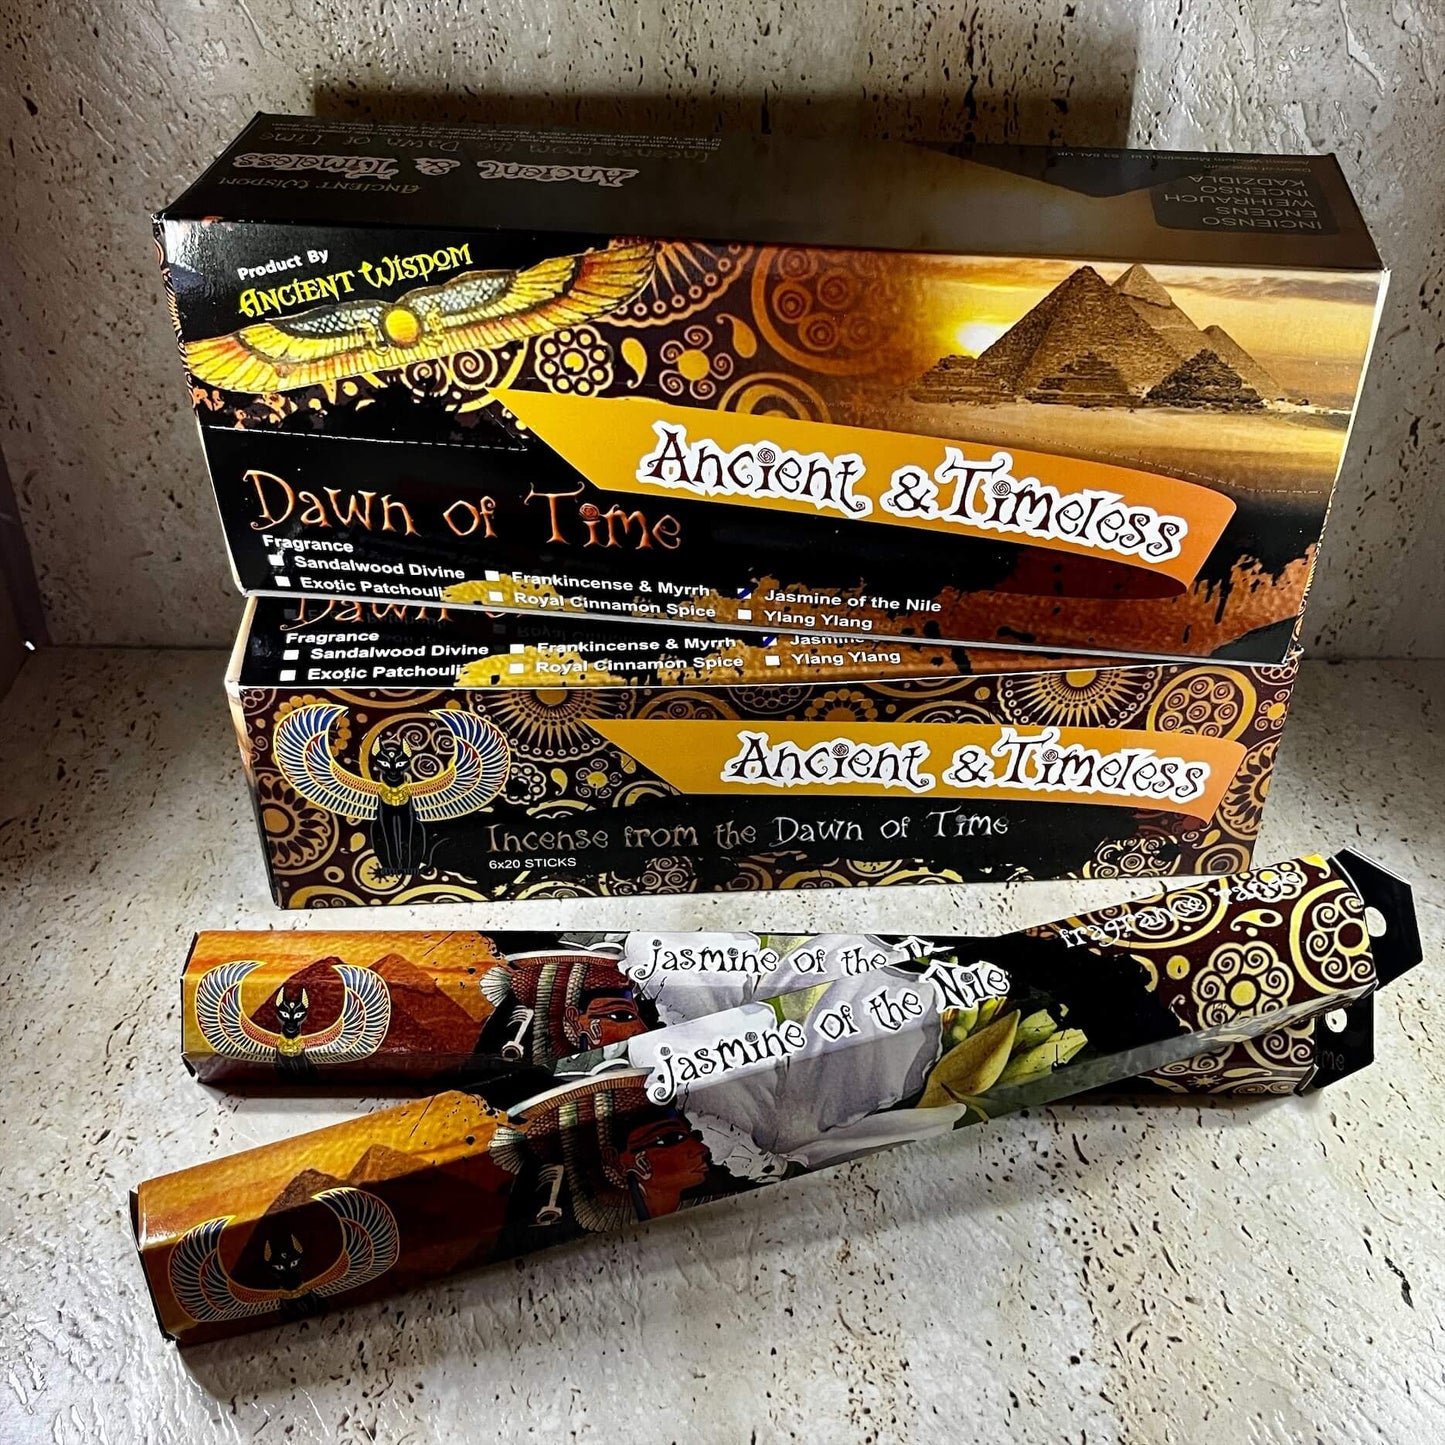 Dawn of Time Jasmine of the Nile incense